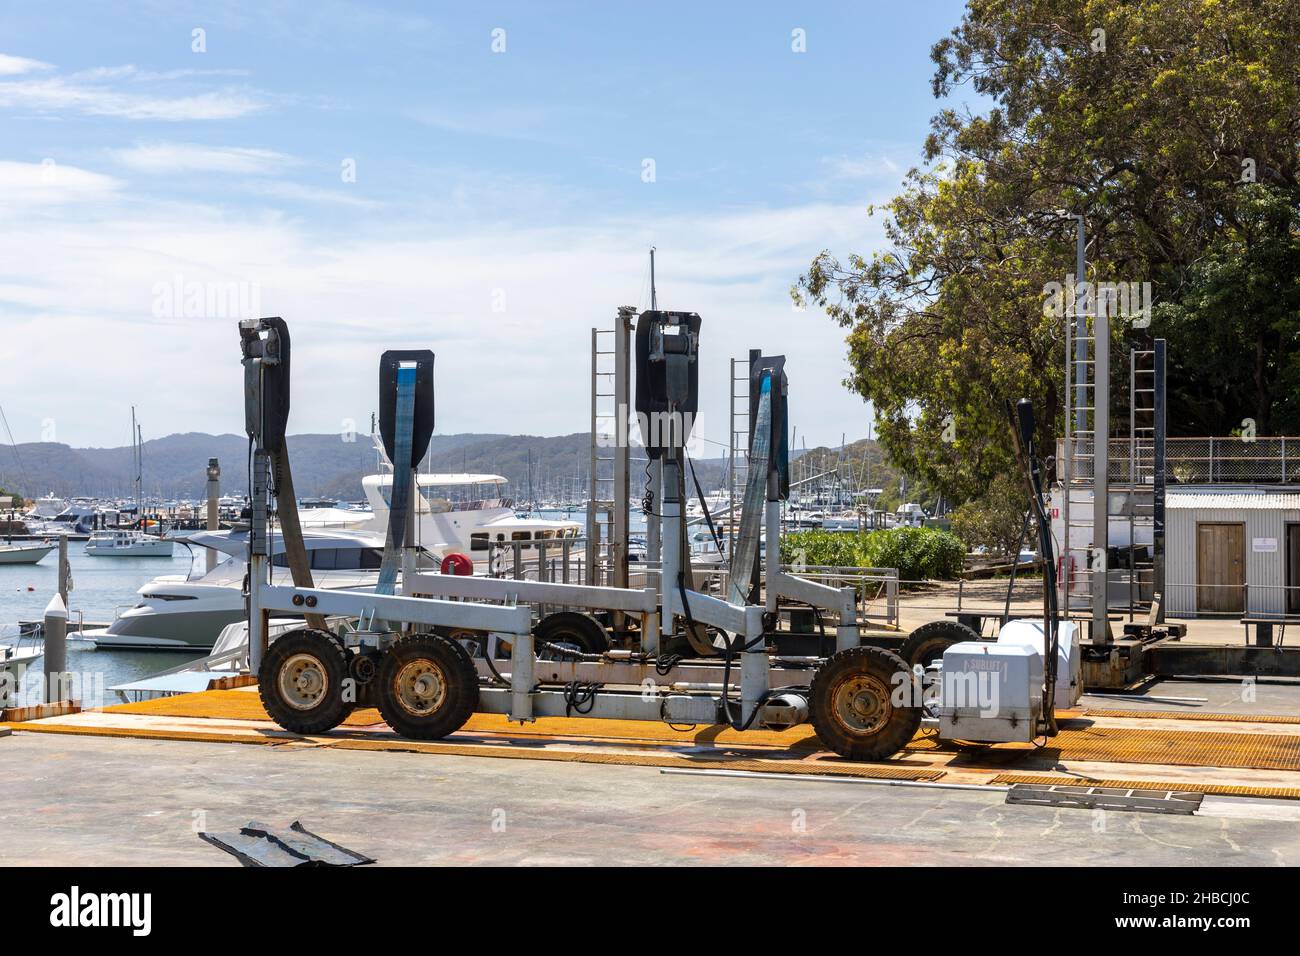 Boat service yard and shipwright services with hoist/crane in the boat yard,Sydney,Australia Stock Photo